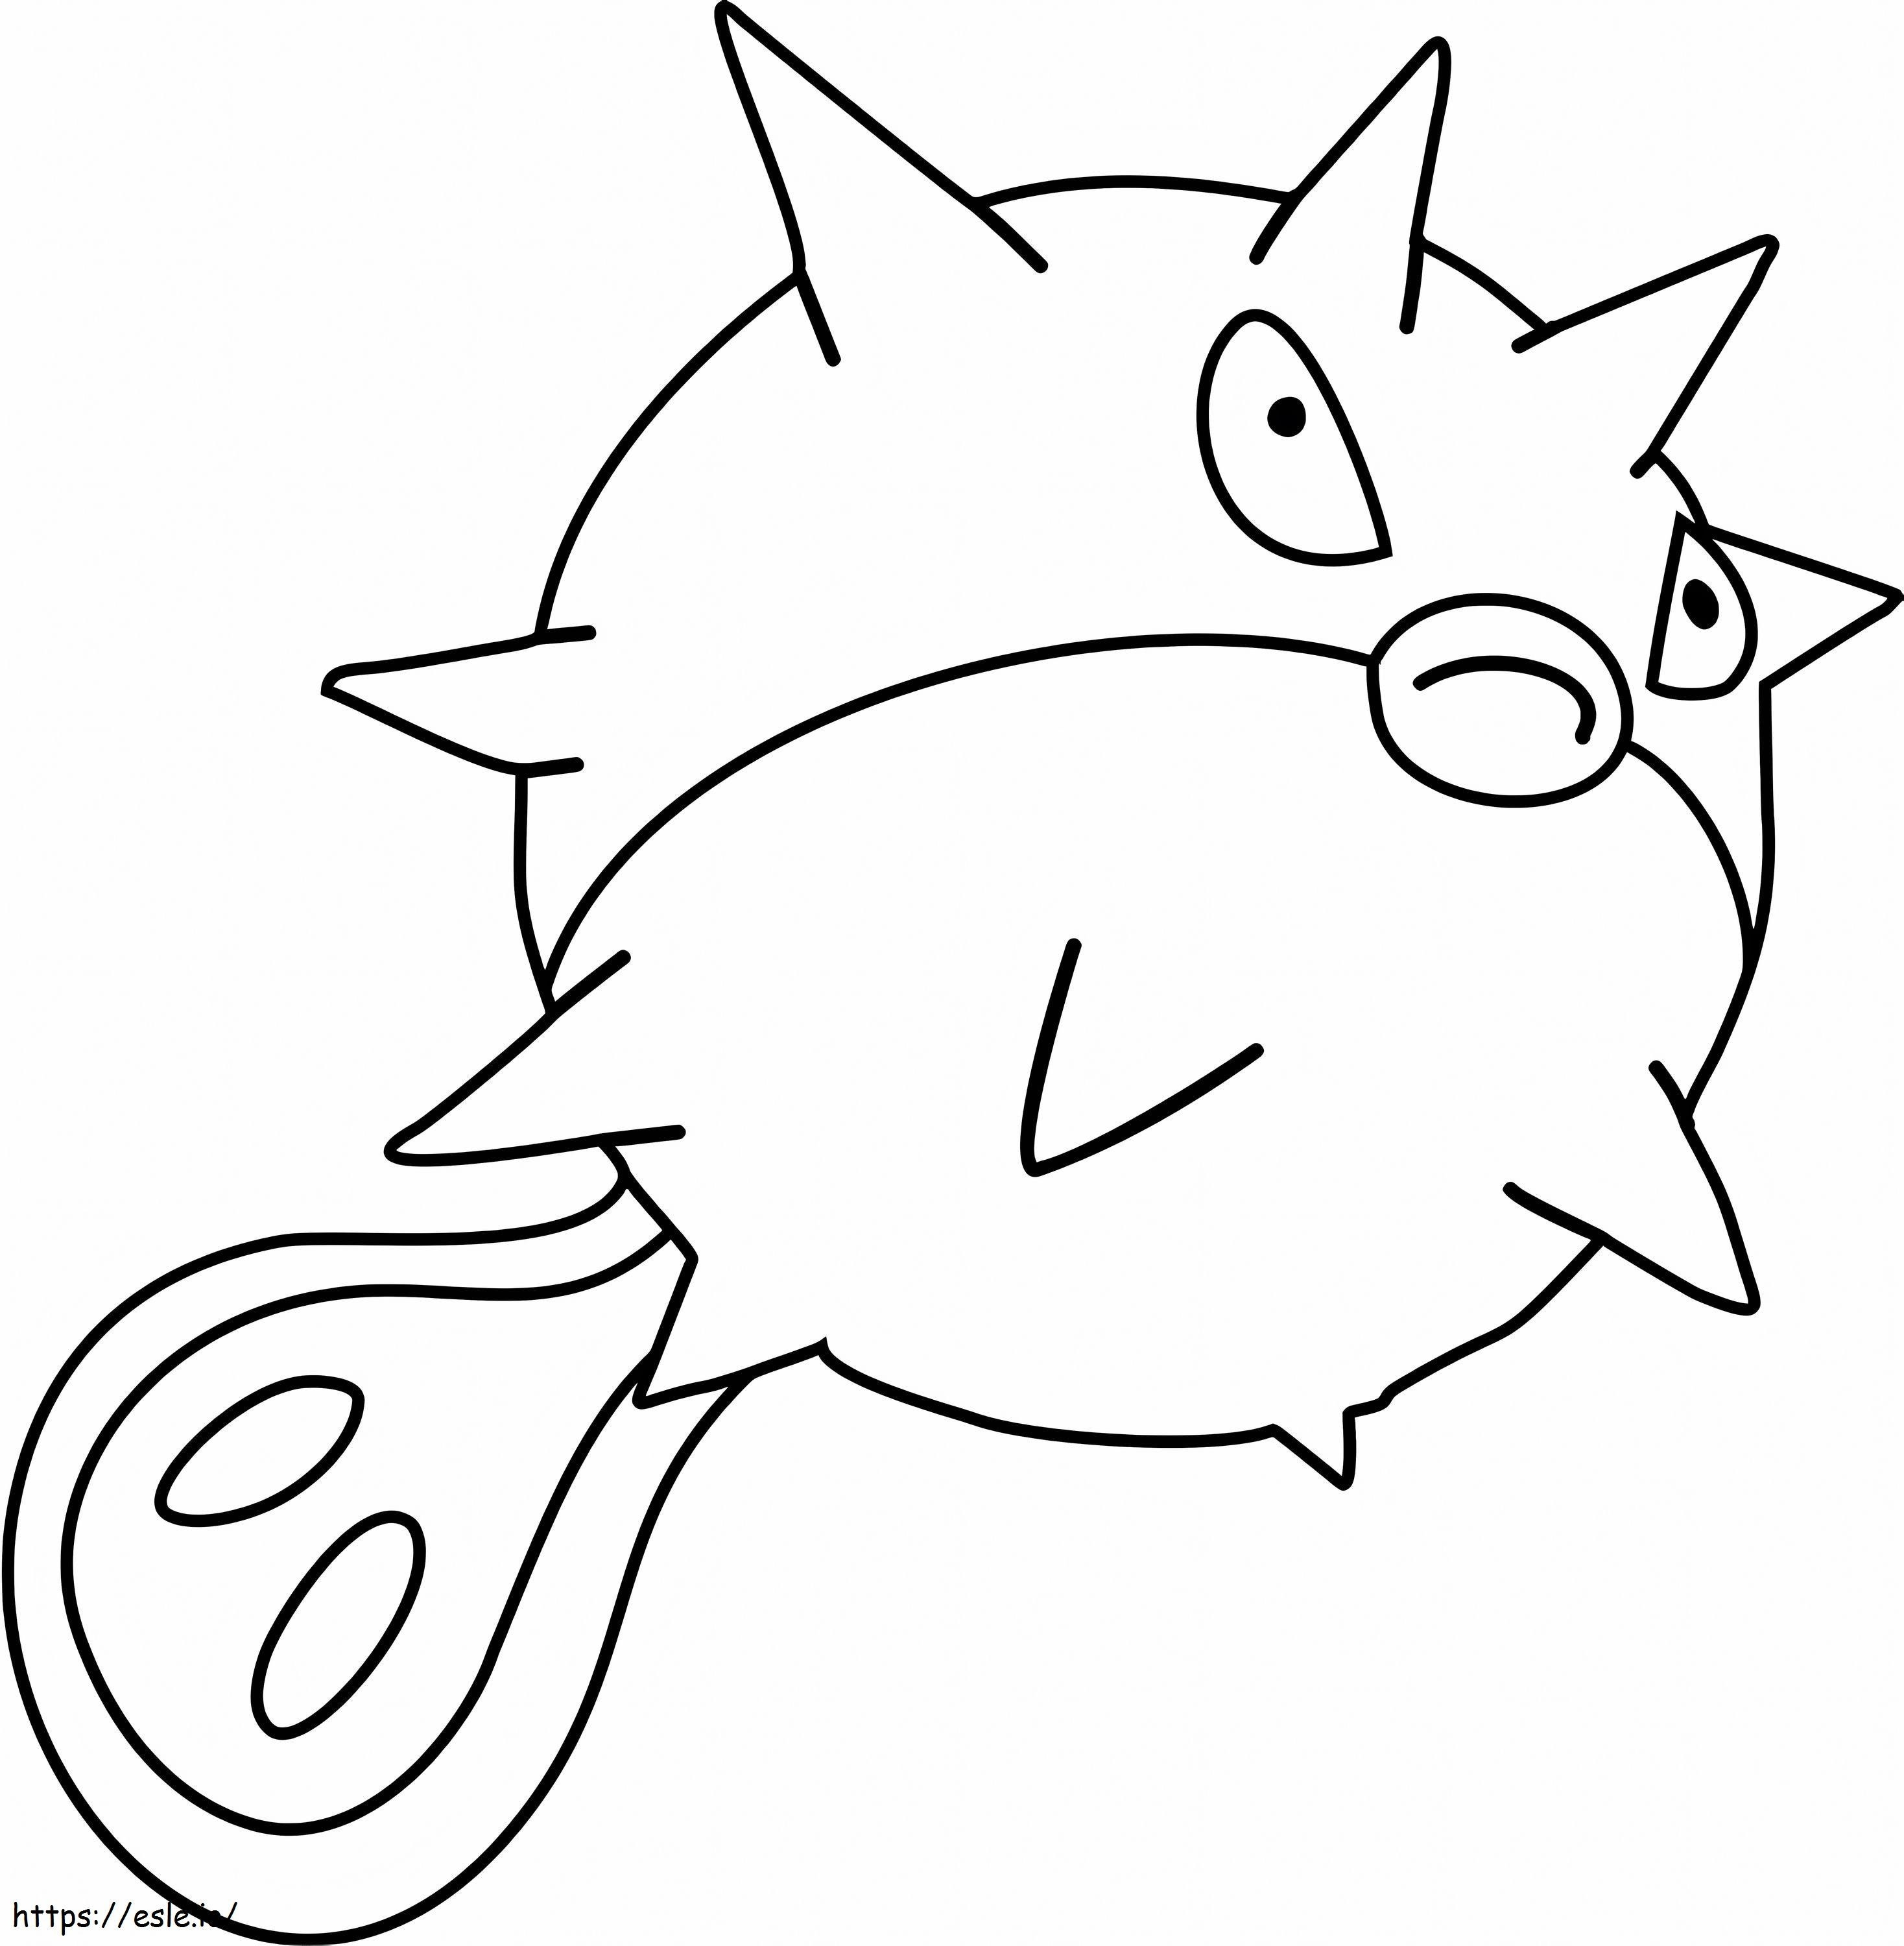 Qwilfish In Pokemon coloring page